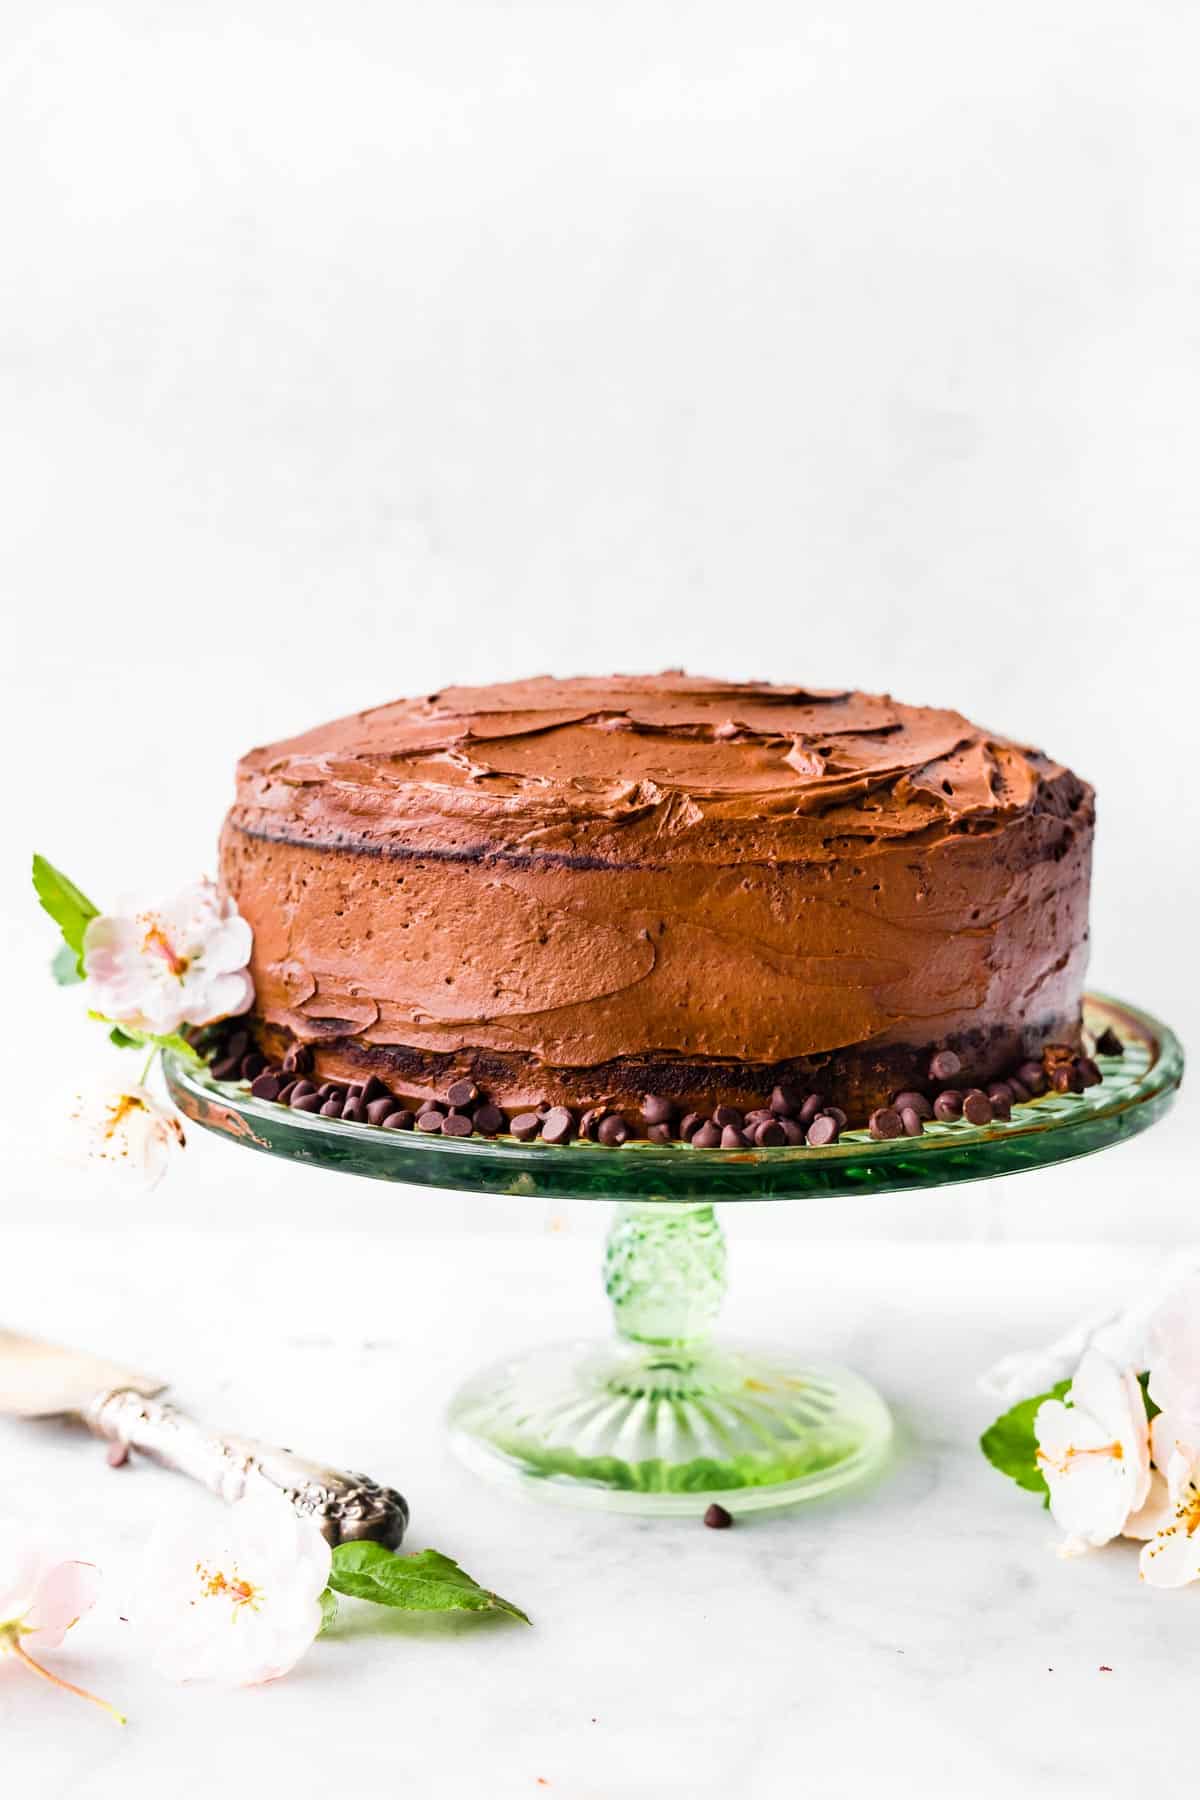 A gluten free chocolate cake iced with chocolate frosting on a cake stand surrounded by chocolate chips.